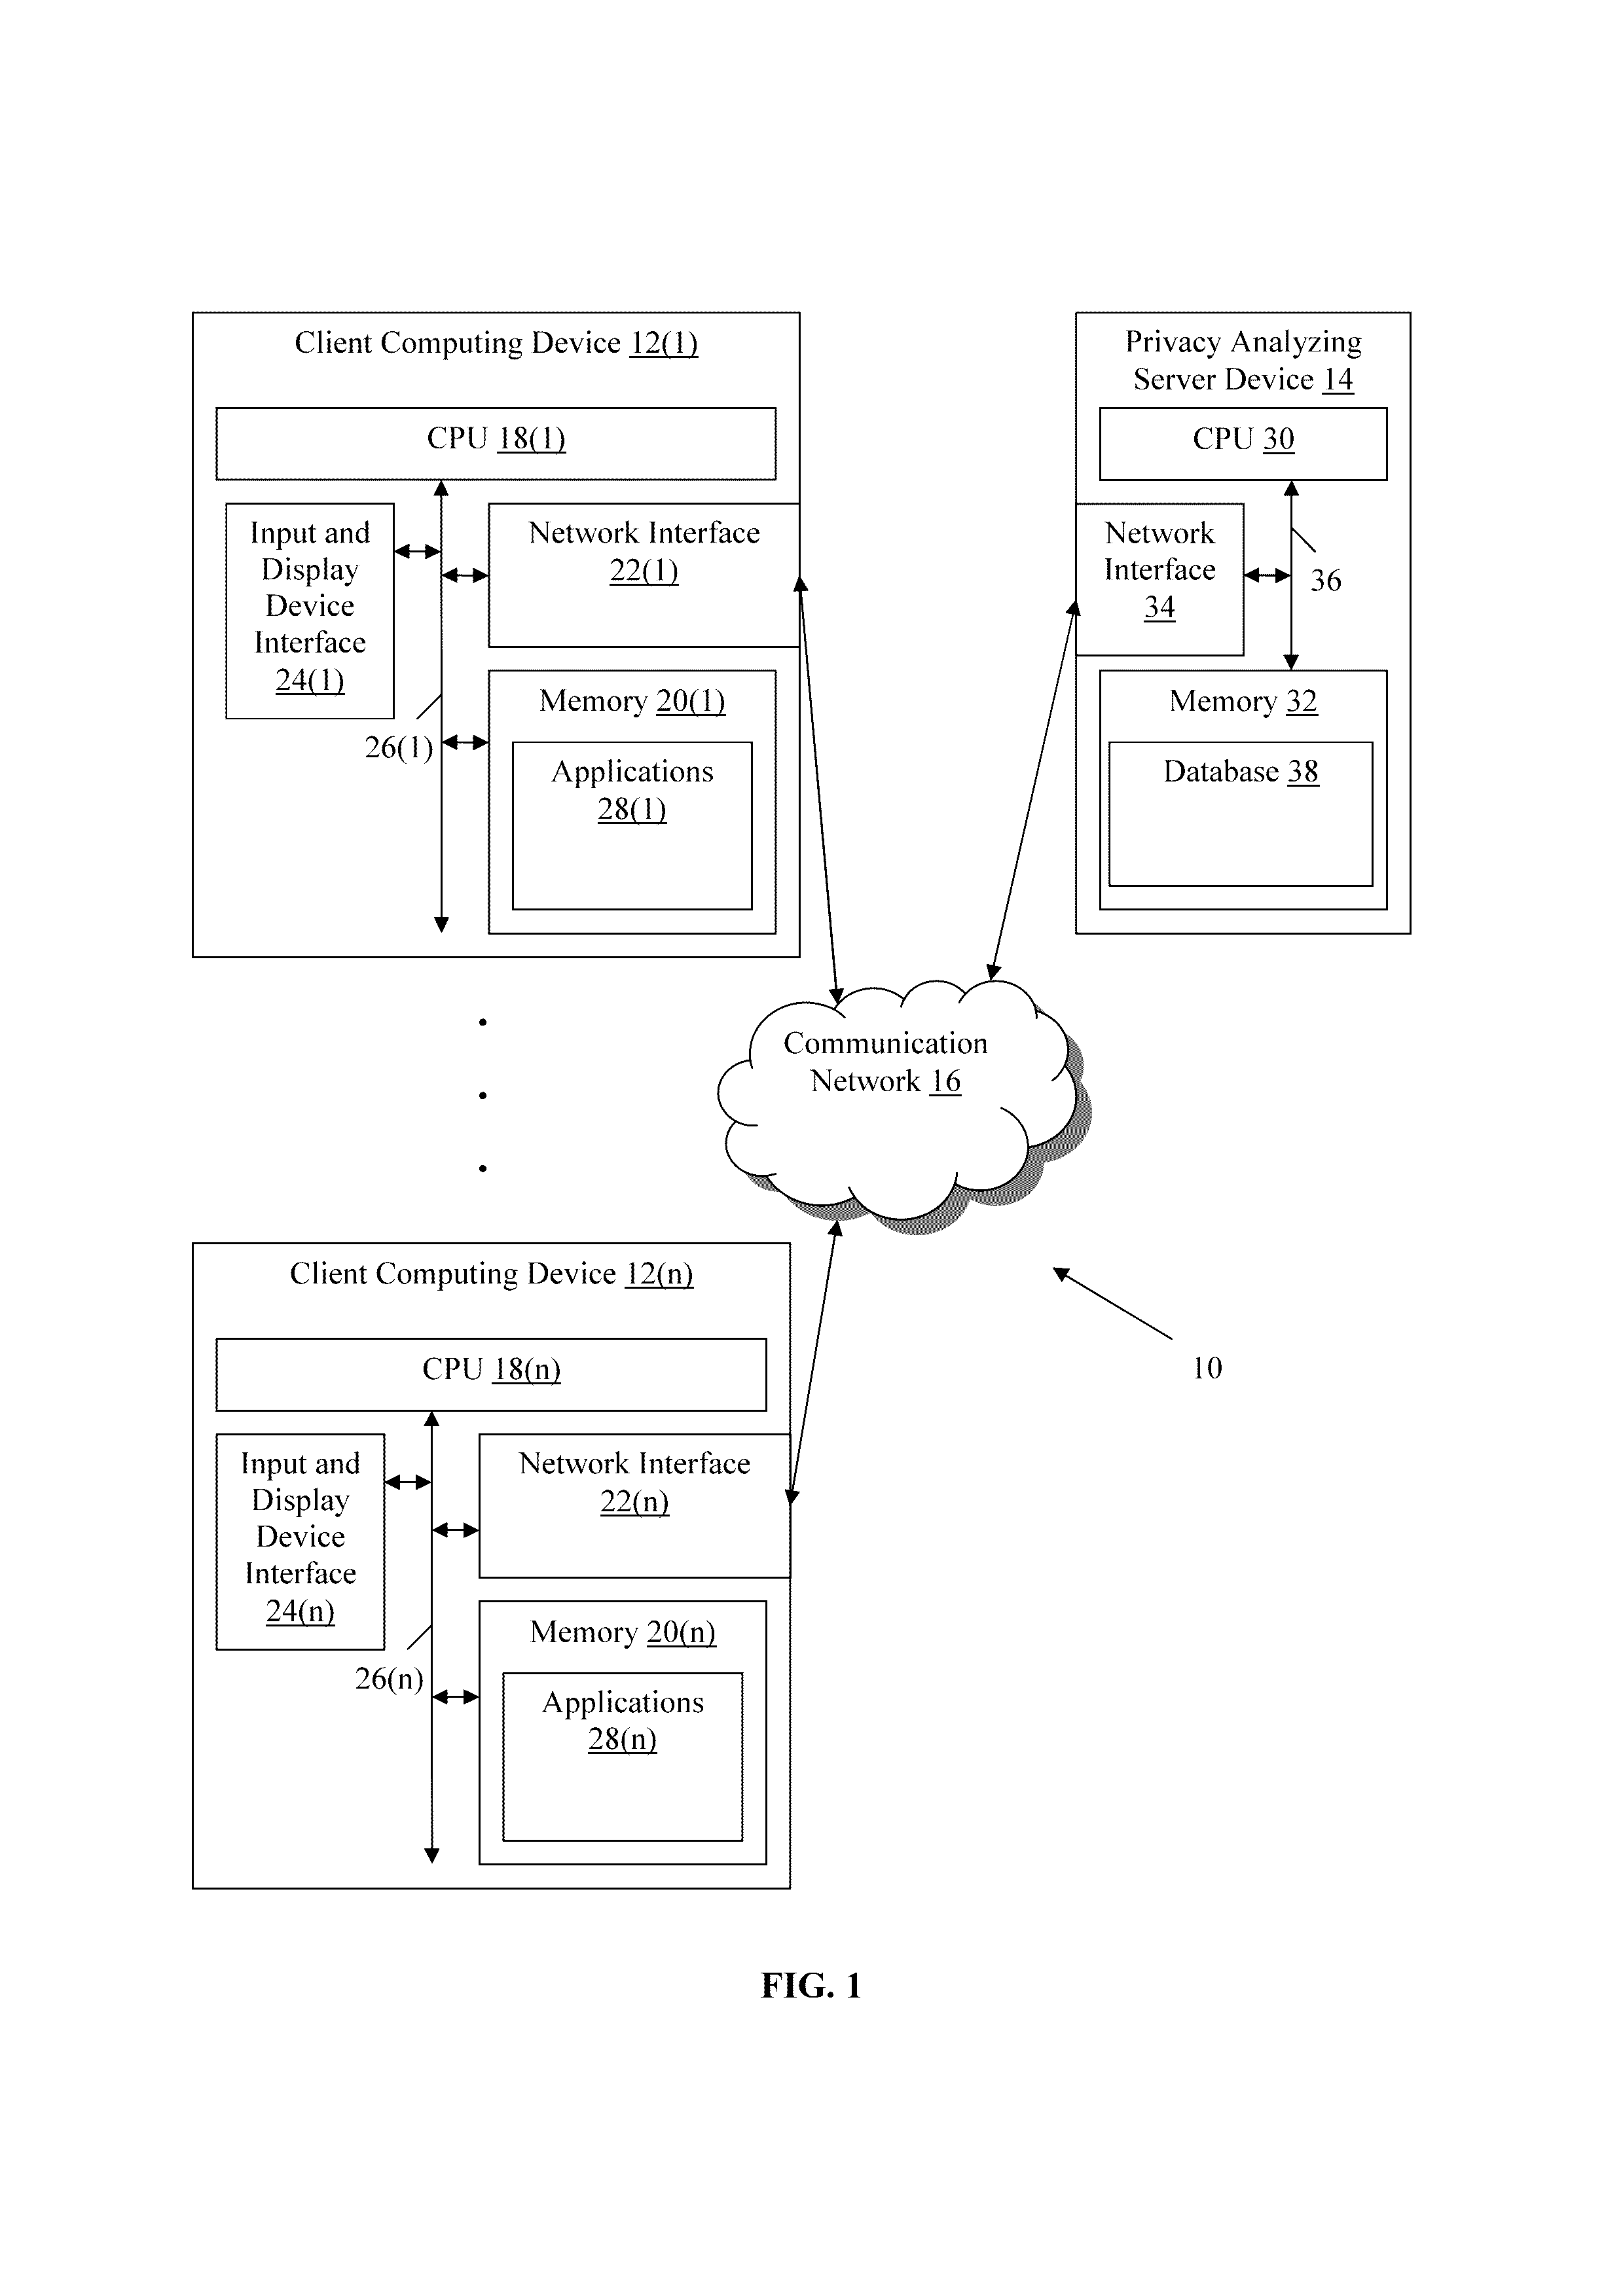 Methods and devices for analyzing user privacy based on a user's online presence